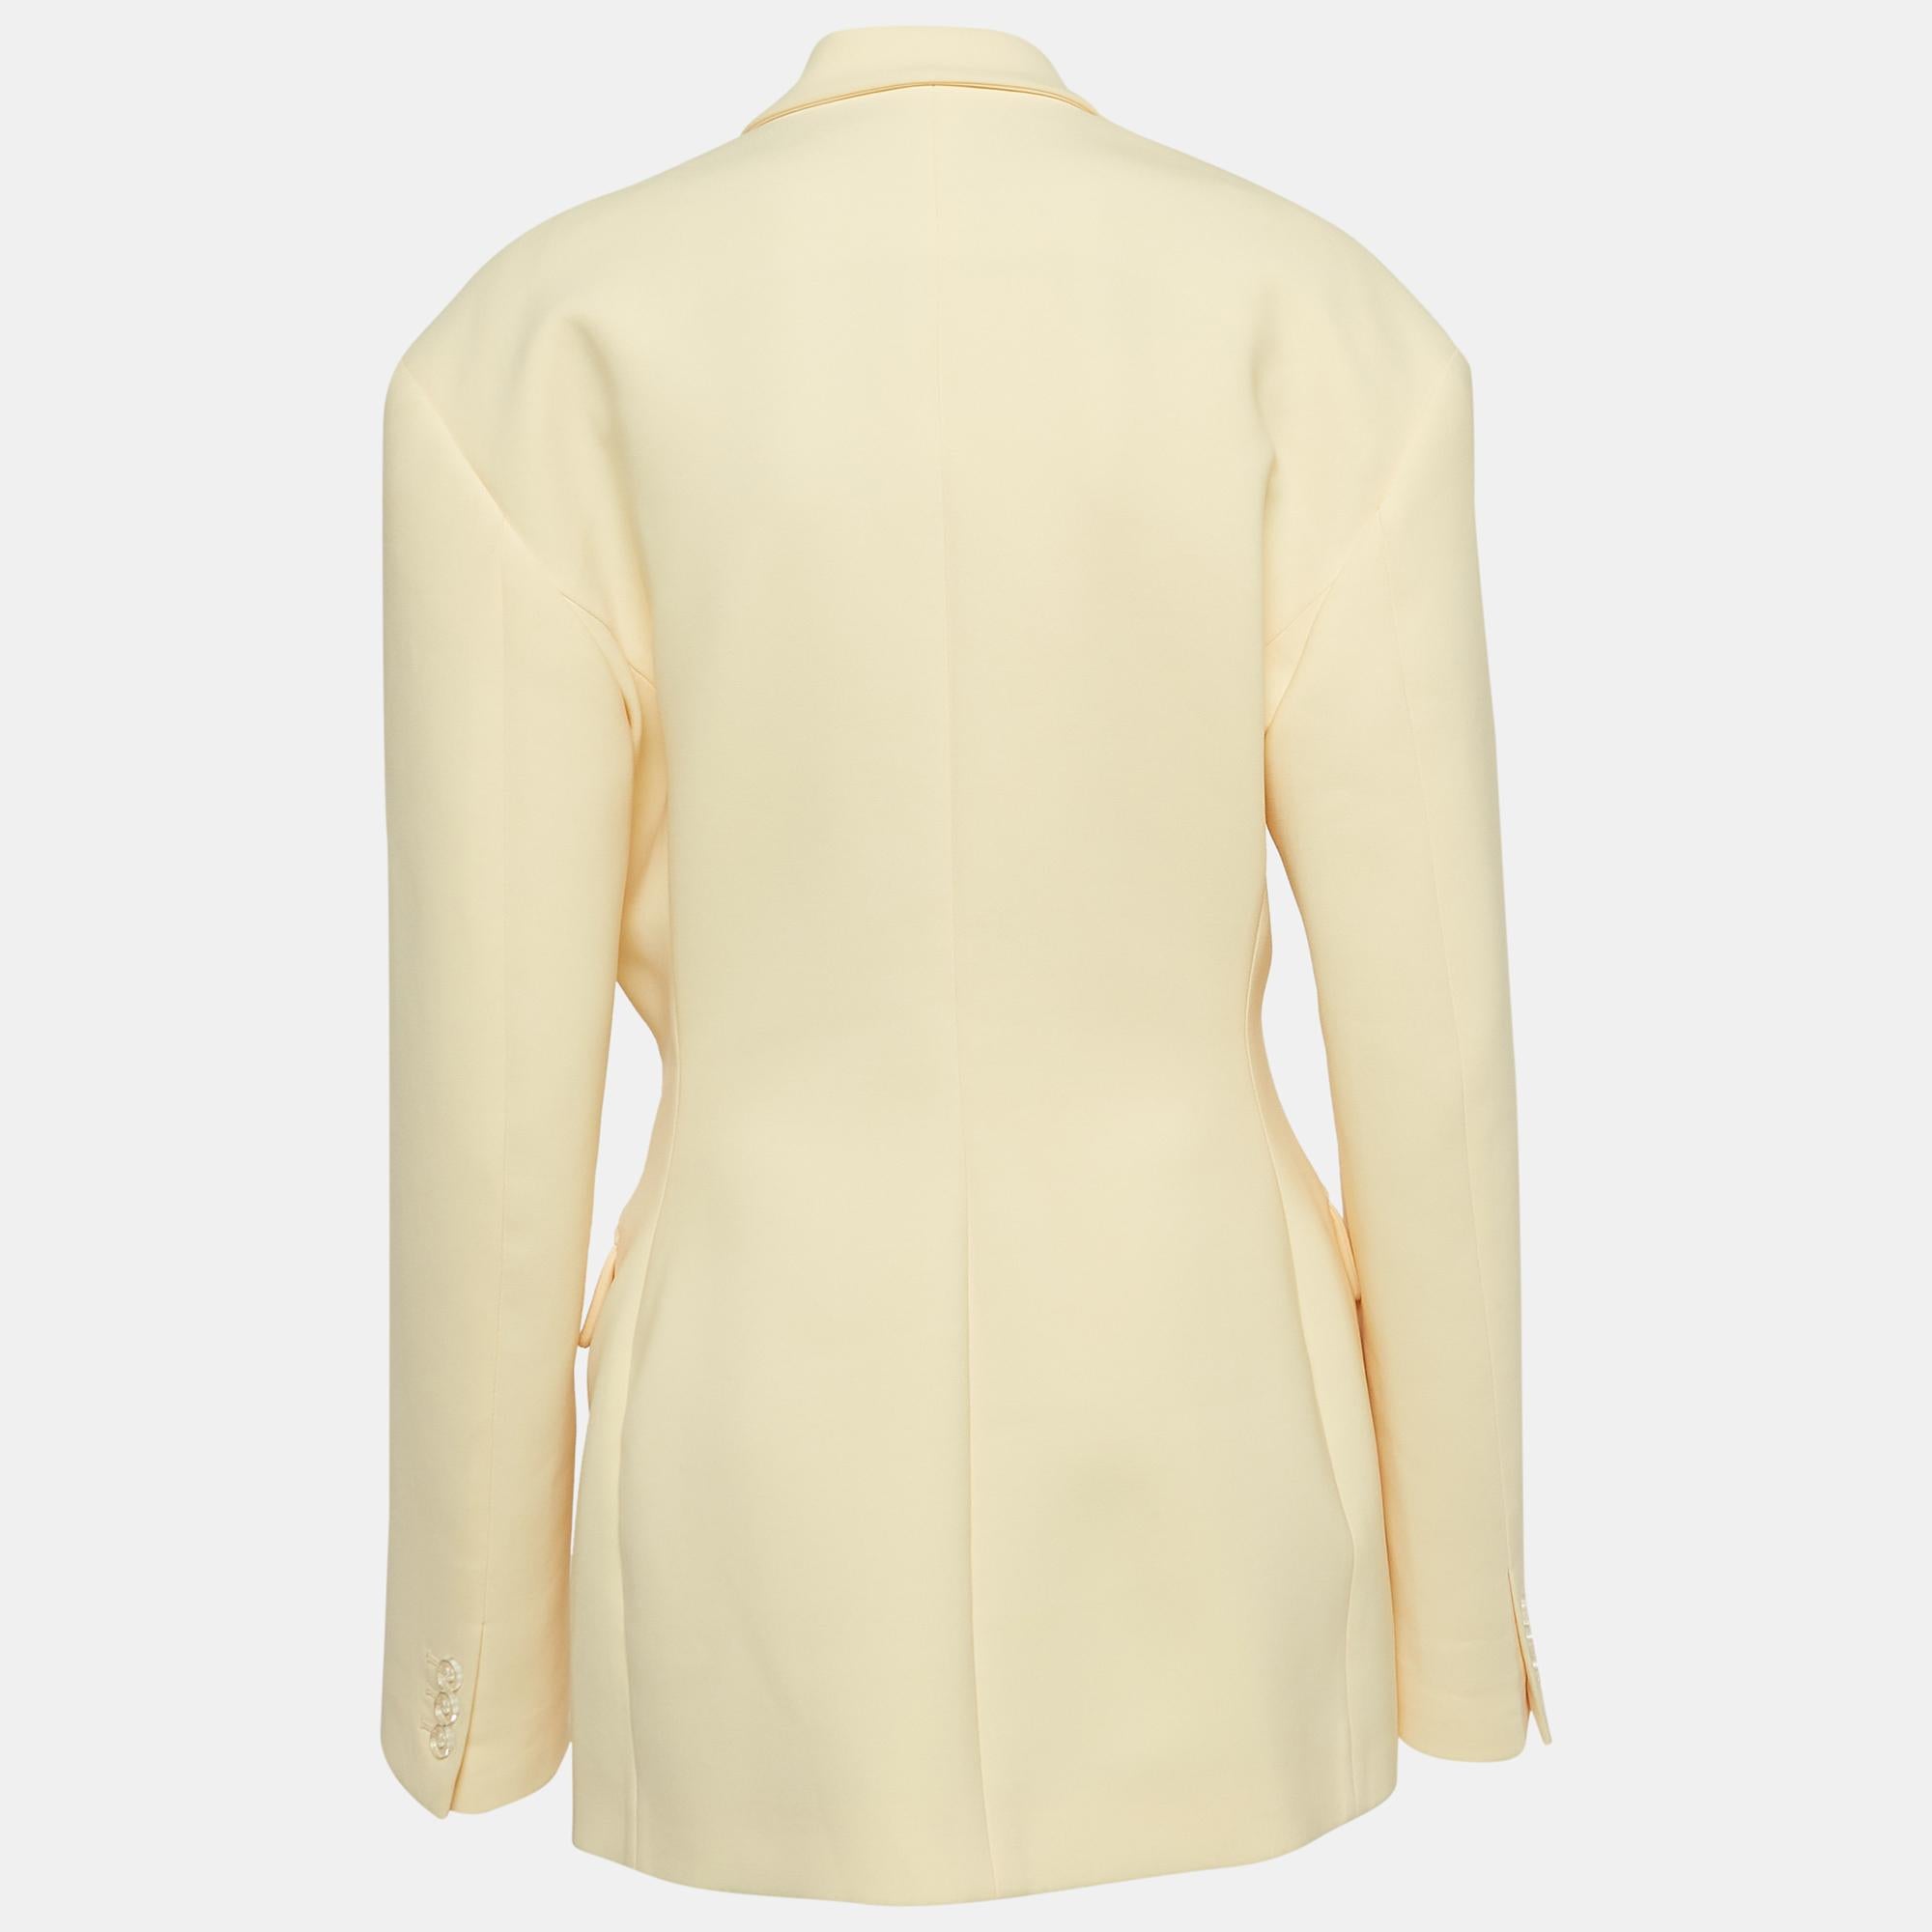 Lend a sharp, fashionable finish to your look with this The Attico blazer. Tailored carefully using quality fabric, the blazer is added with front buttons, pockets, and long sleeves.

Includes: Brand Tag, Extra Button